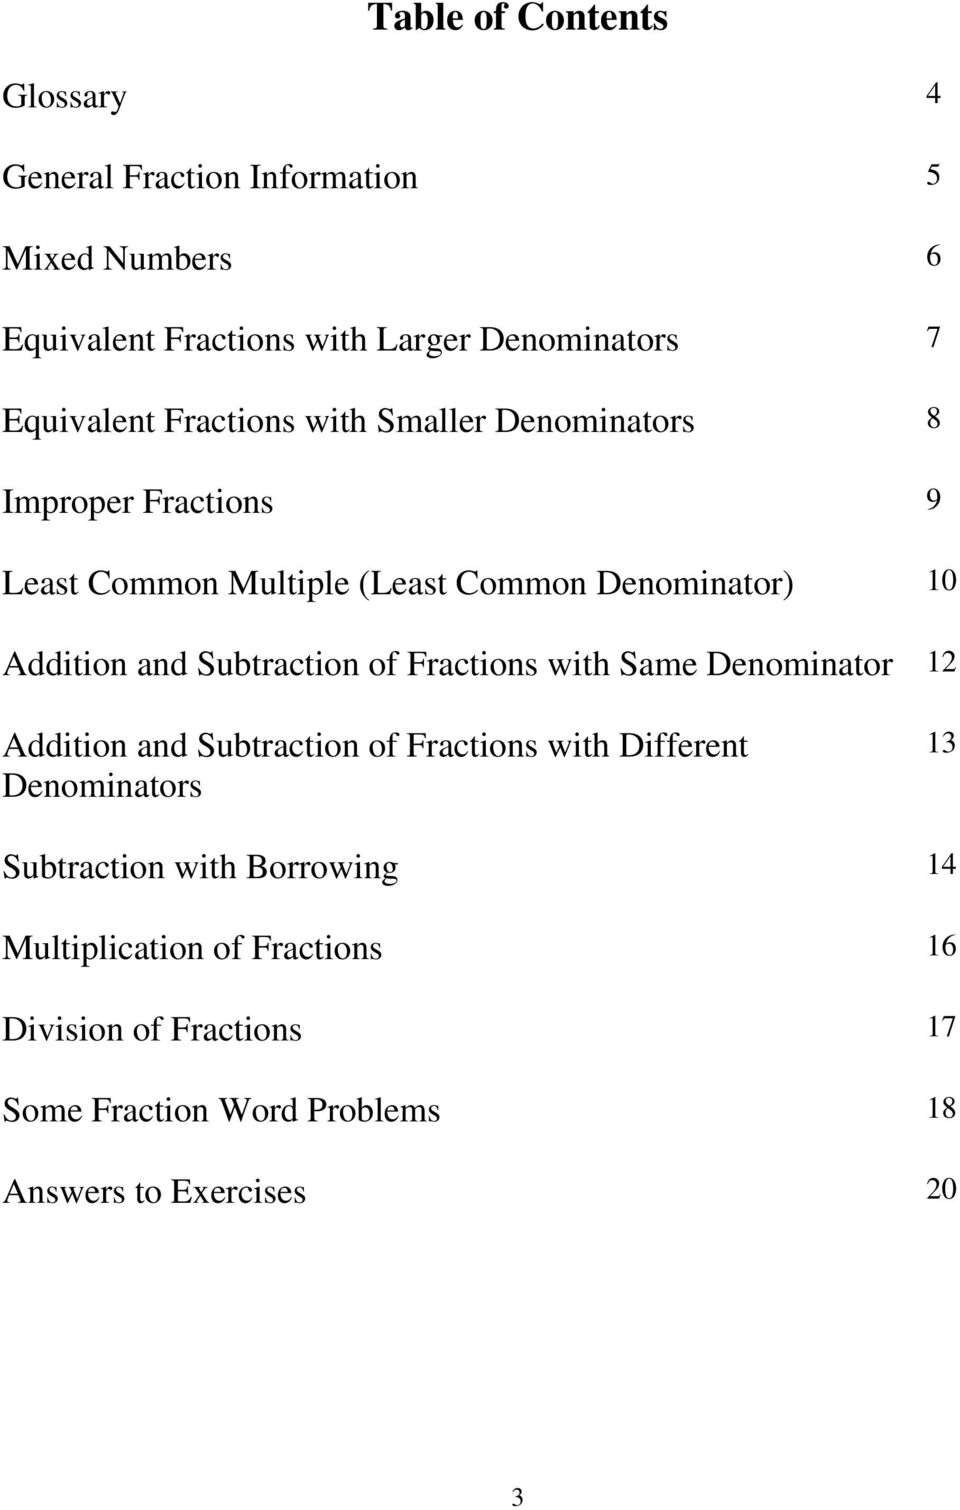 Addition and Subtraction of Fractions with Same Denominator Addition and Subtraction of Fractions with Different